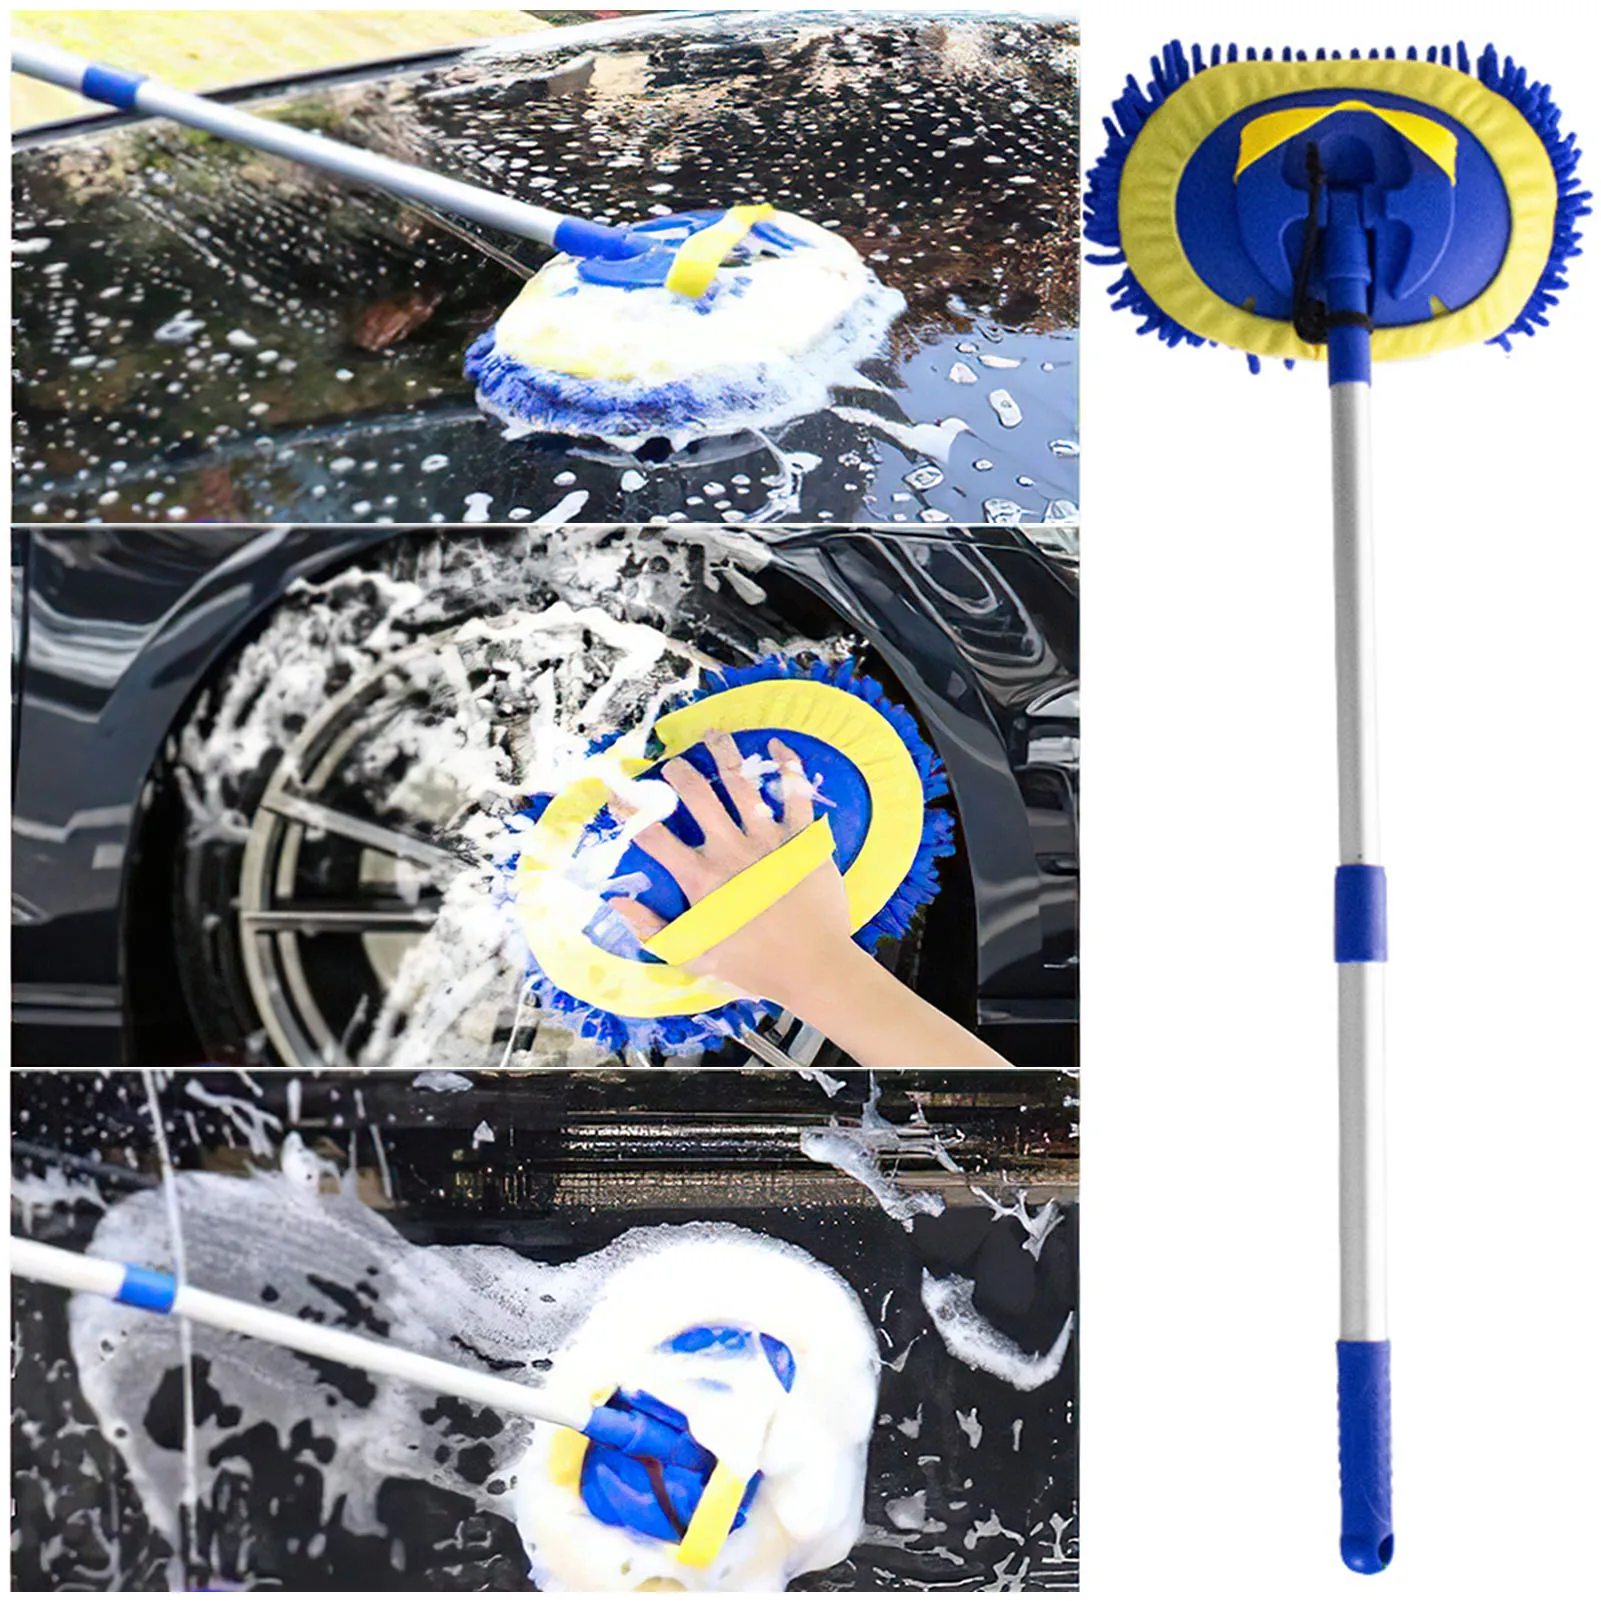 

Retractable Car Wash Mop 180 Rotation Detachable Mop 3-in-1Detailing Brushes Mop For Car Cleaning Car Dust Remover Brush